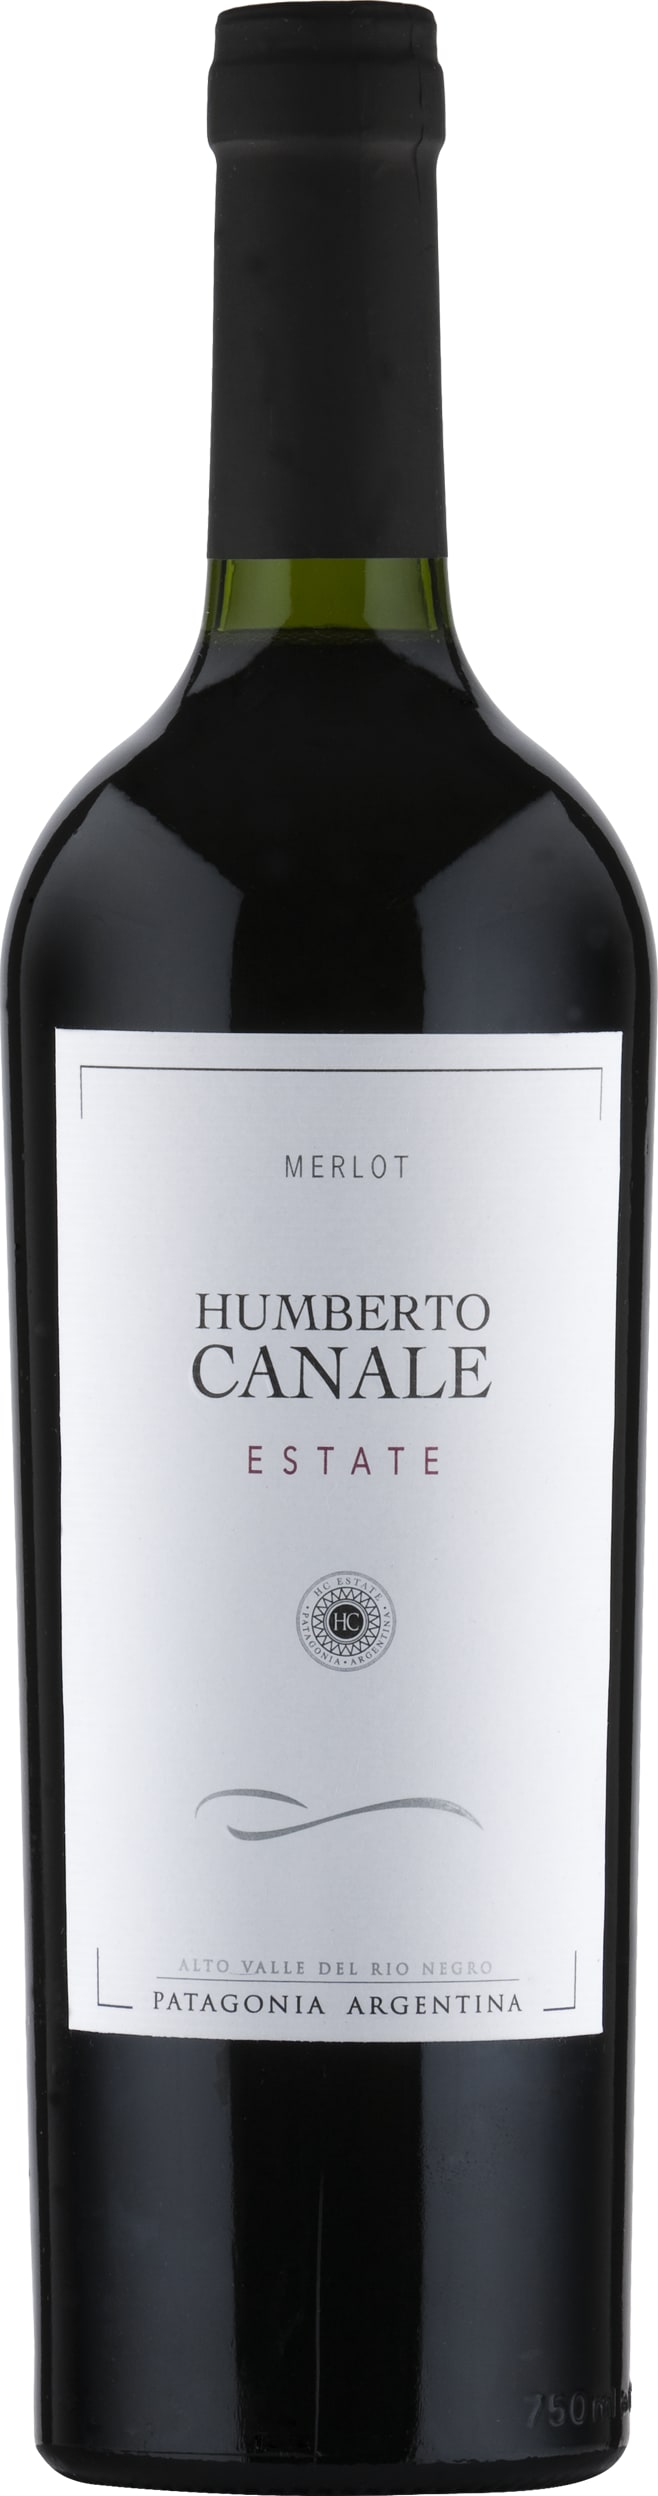 Humberto Canale Estate Merlot 2021 75cl - Buy Humberto Canale Wines from GREAT WINES DIRECT wine shop